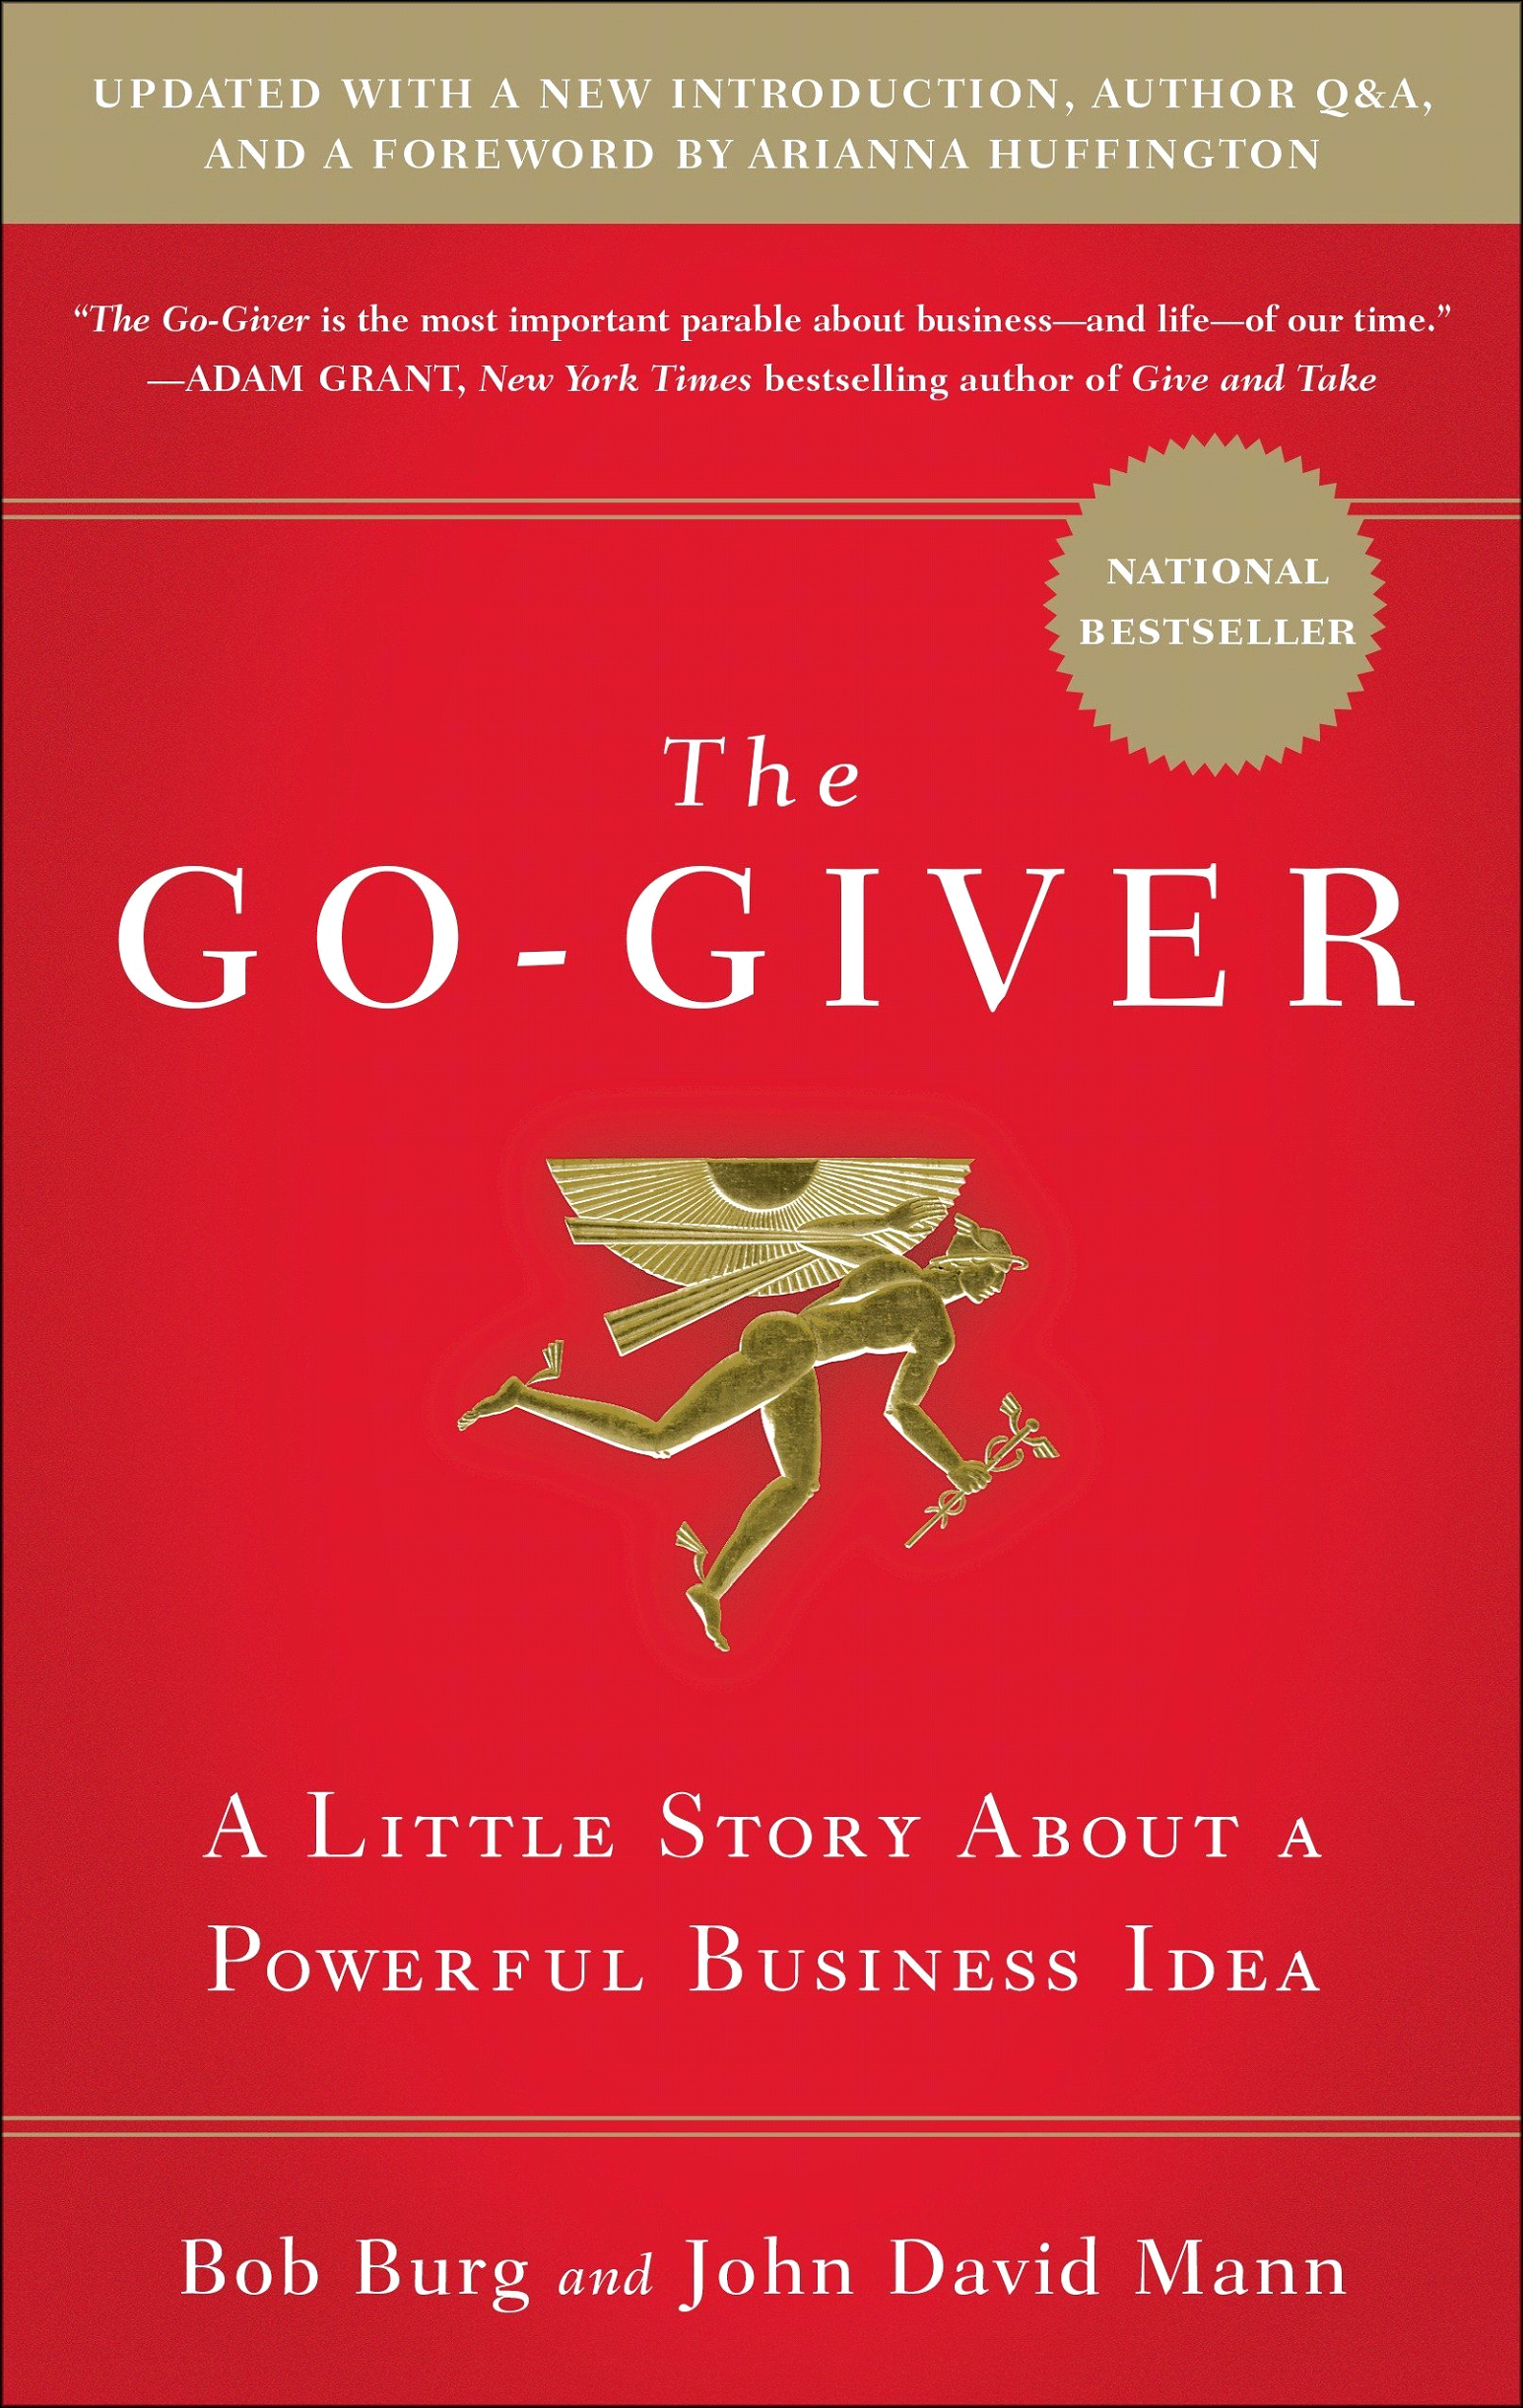 Featured image for “The Go-Giver by Bob Burg and John David Mann ”